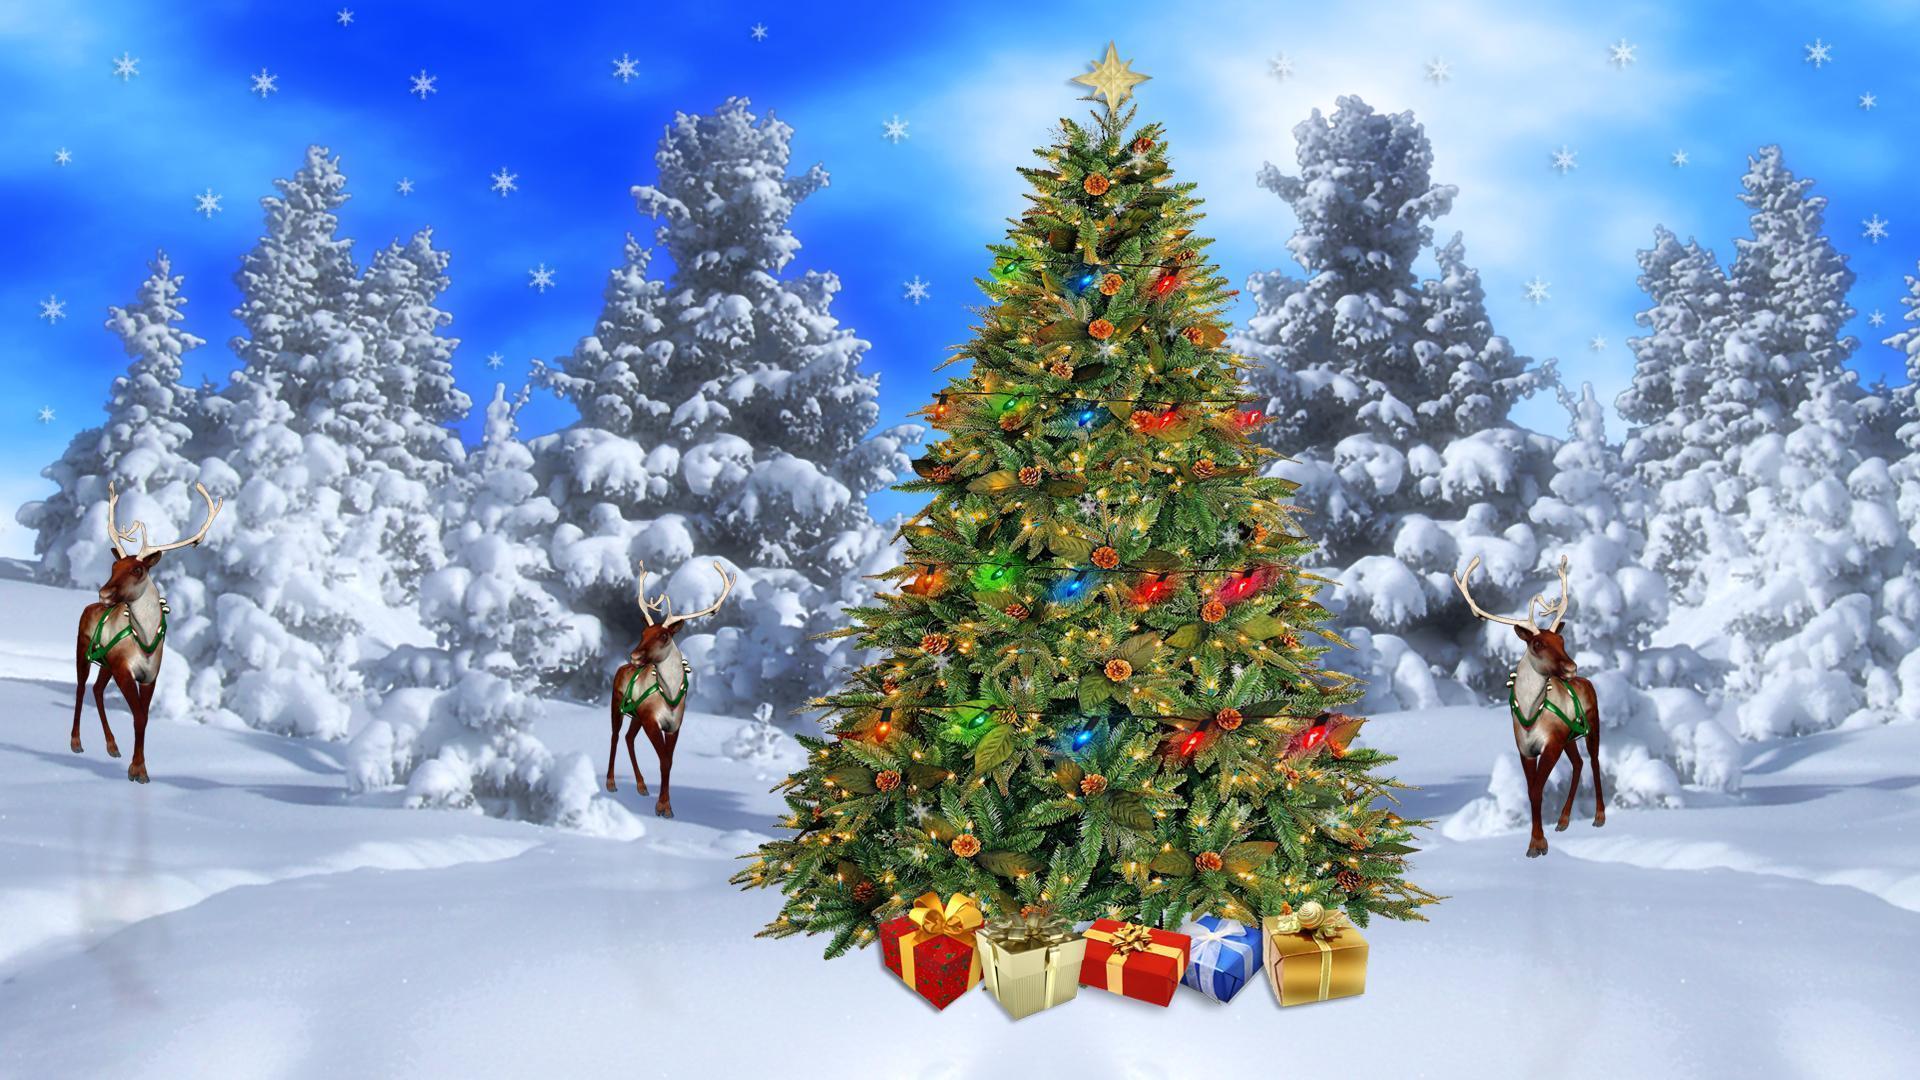 Christmas Scenery Wallpapers - Wallpaper Cave